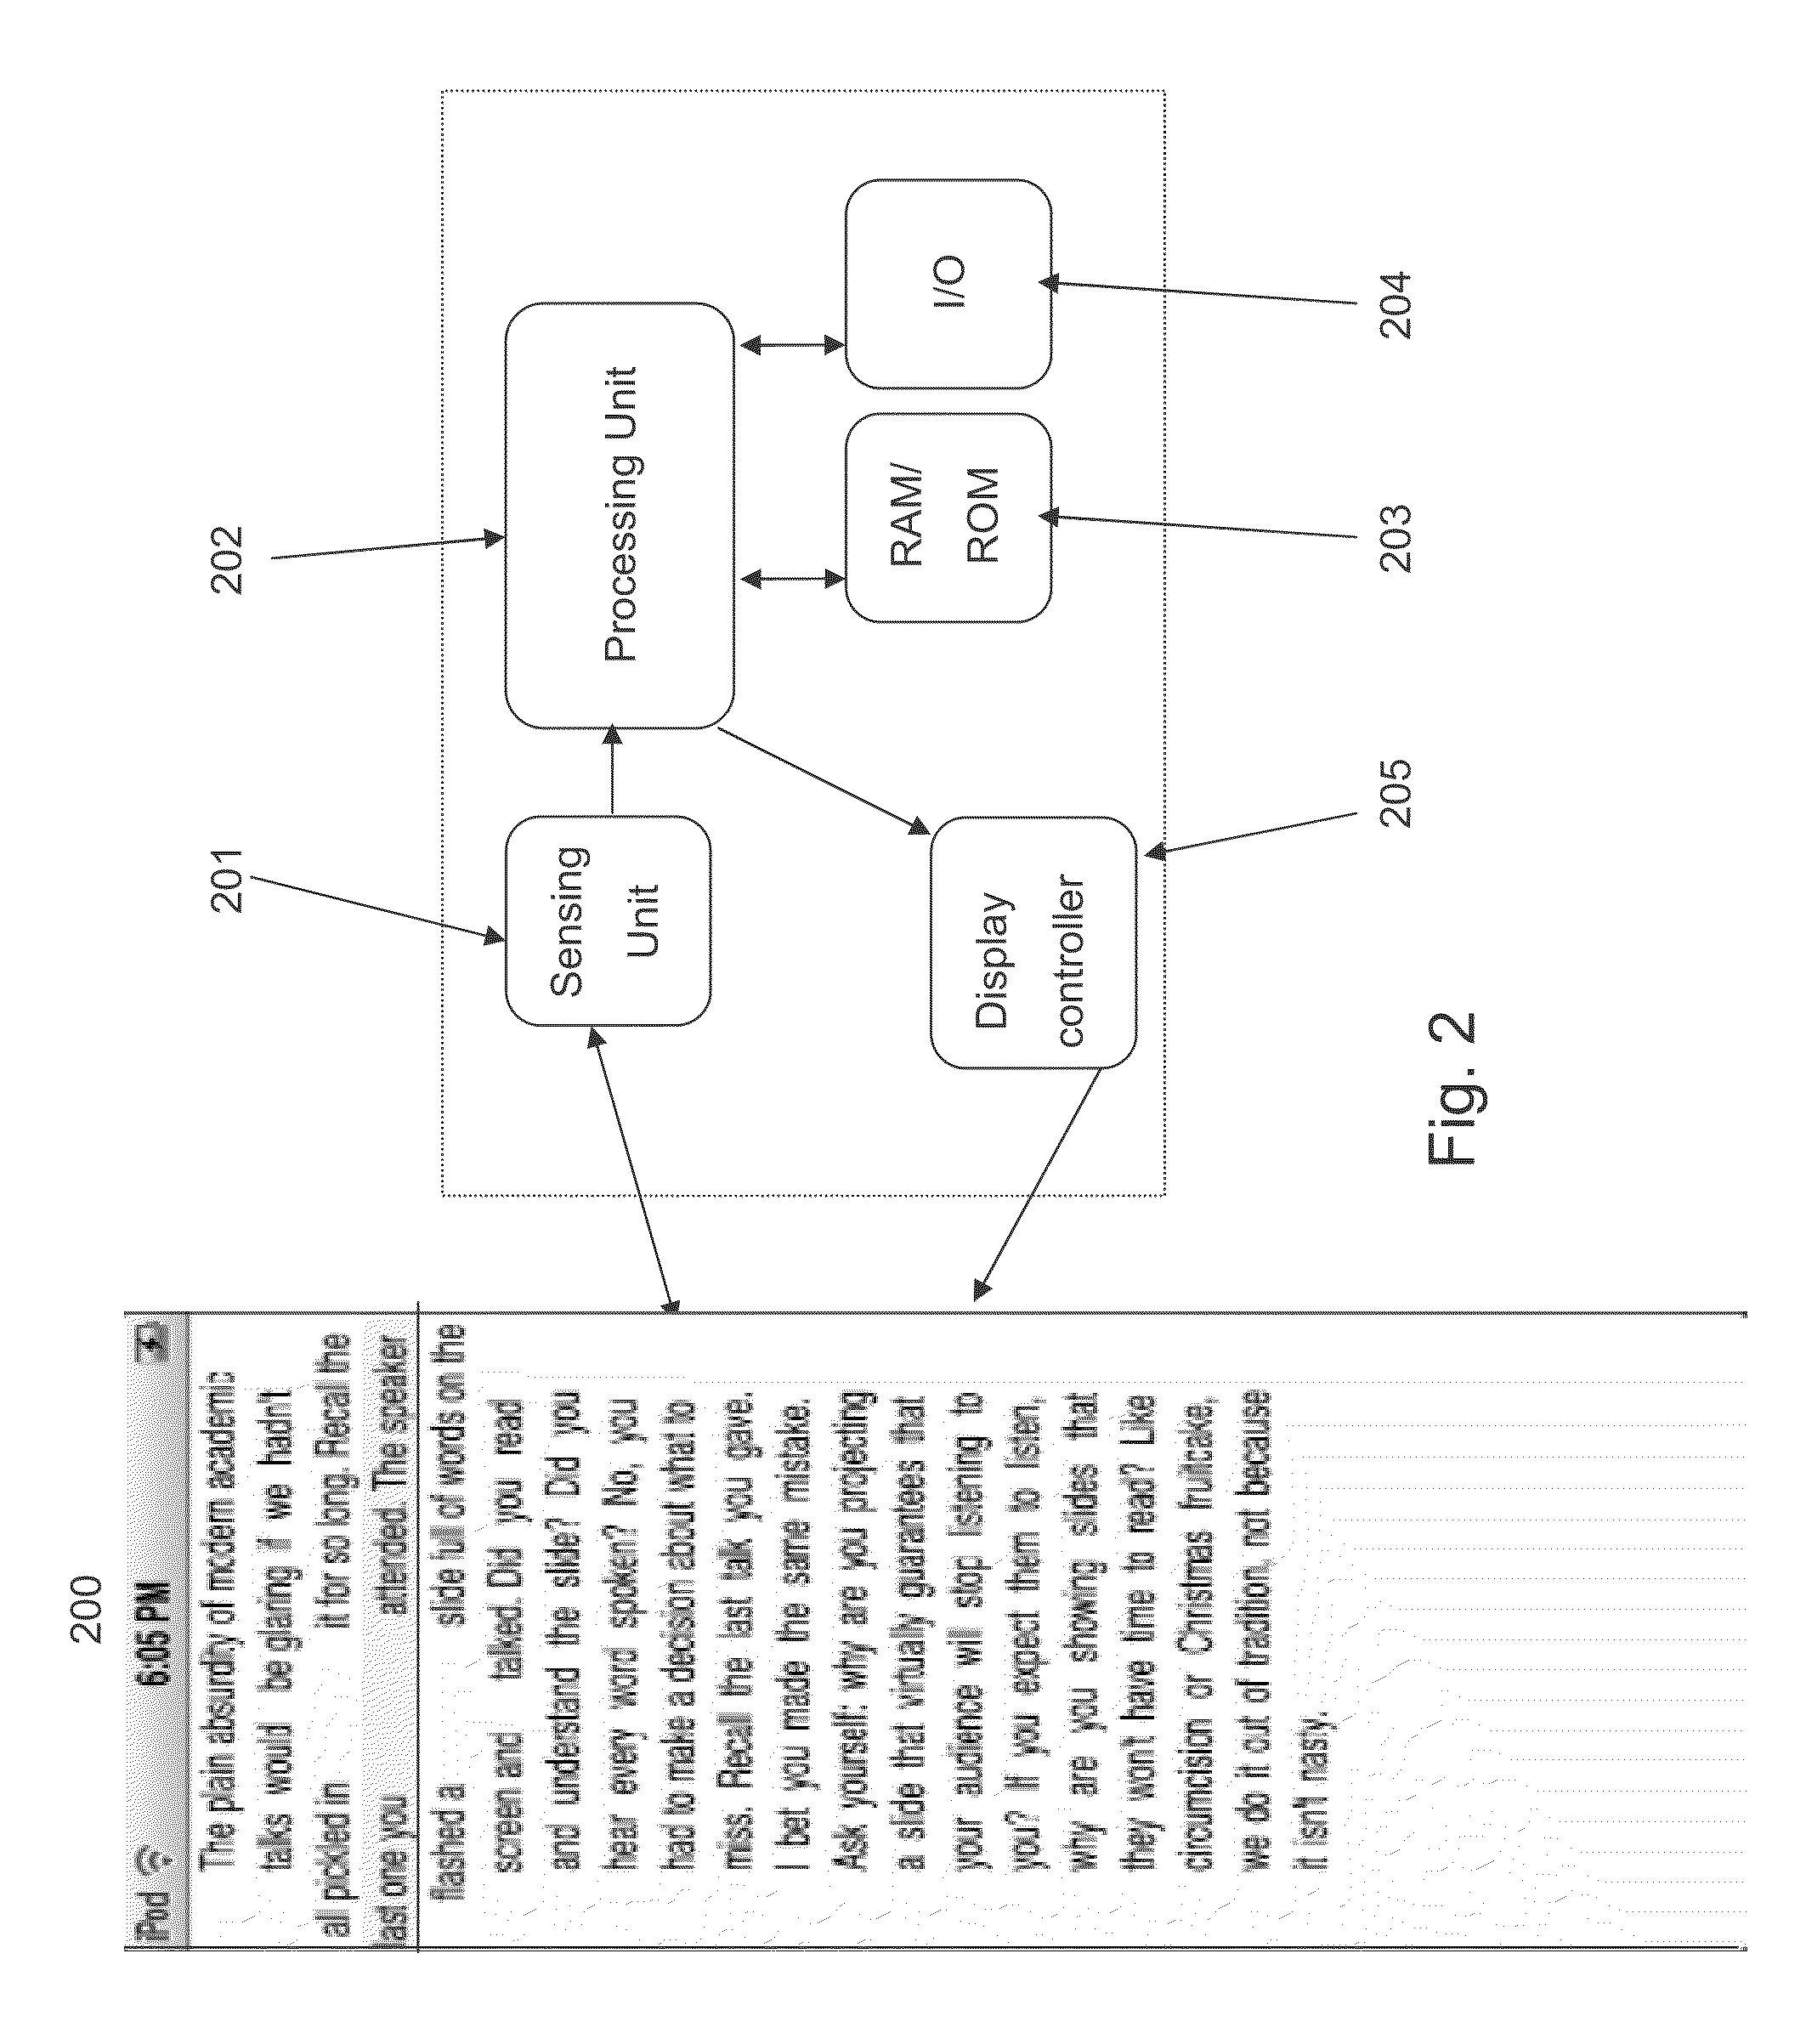 Finger occlusion avoidance on touch display devices